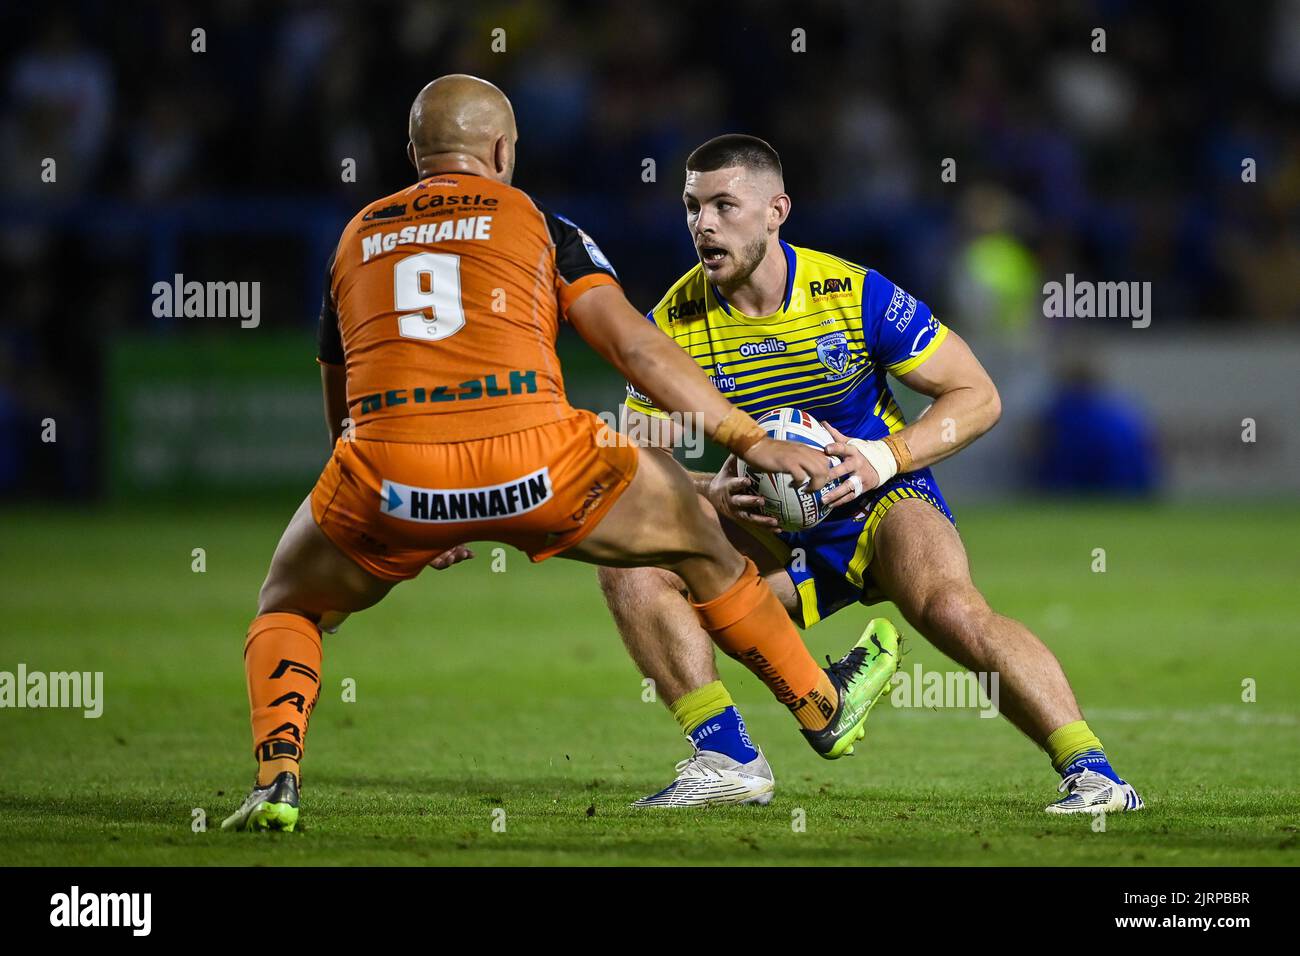 Danny Walker #16 of Warrington Wolves in action Stock Photo